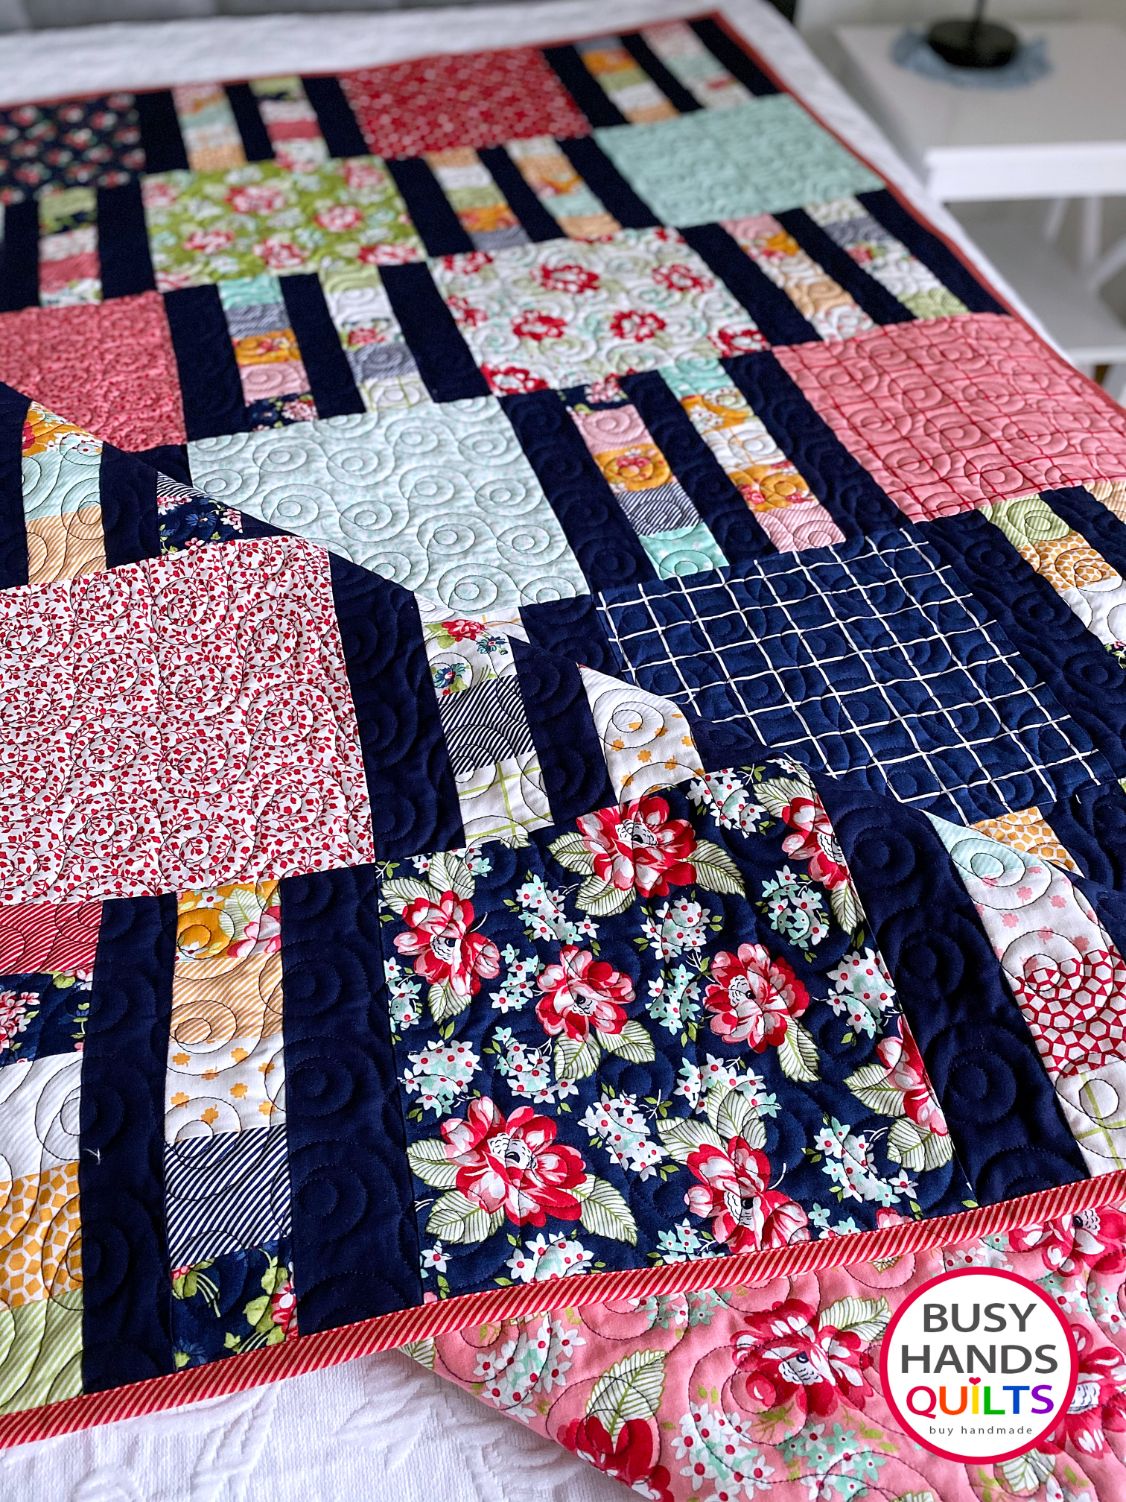 Custom Handmade Picket Fence Rectangular Throw Quilt in One Fine Day - Ready to Ship Busy Hands Quilts $349